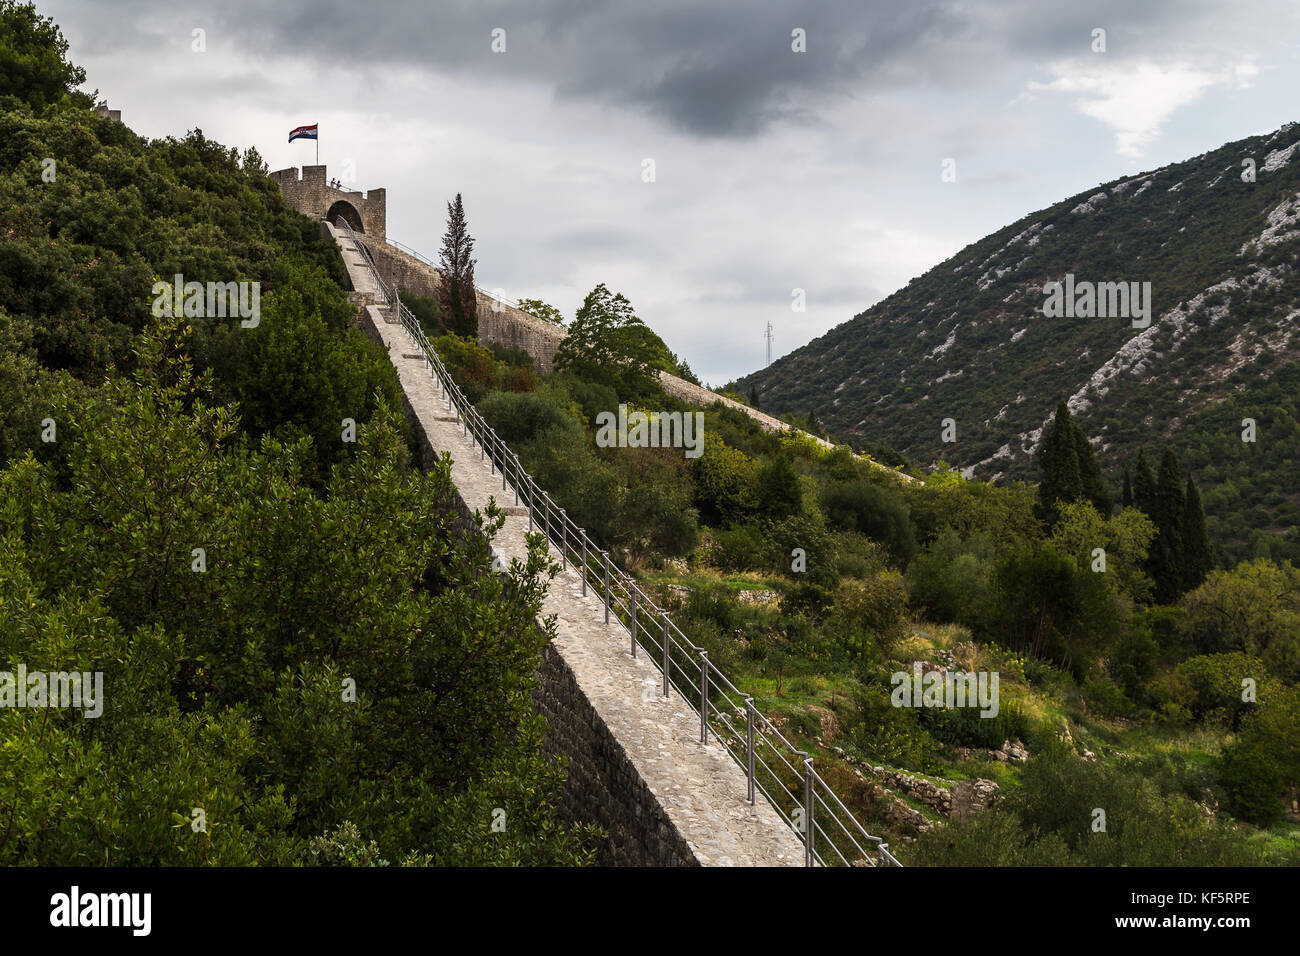 Walking along the 5.5 kilometer wall of Ston (Croatia) which is the second longest in the world after the Great Wall of China. Stock Photo